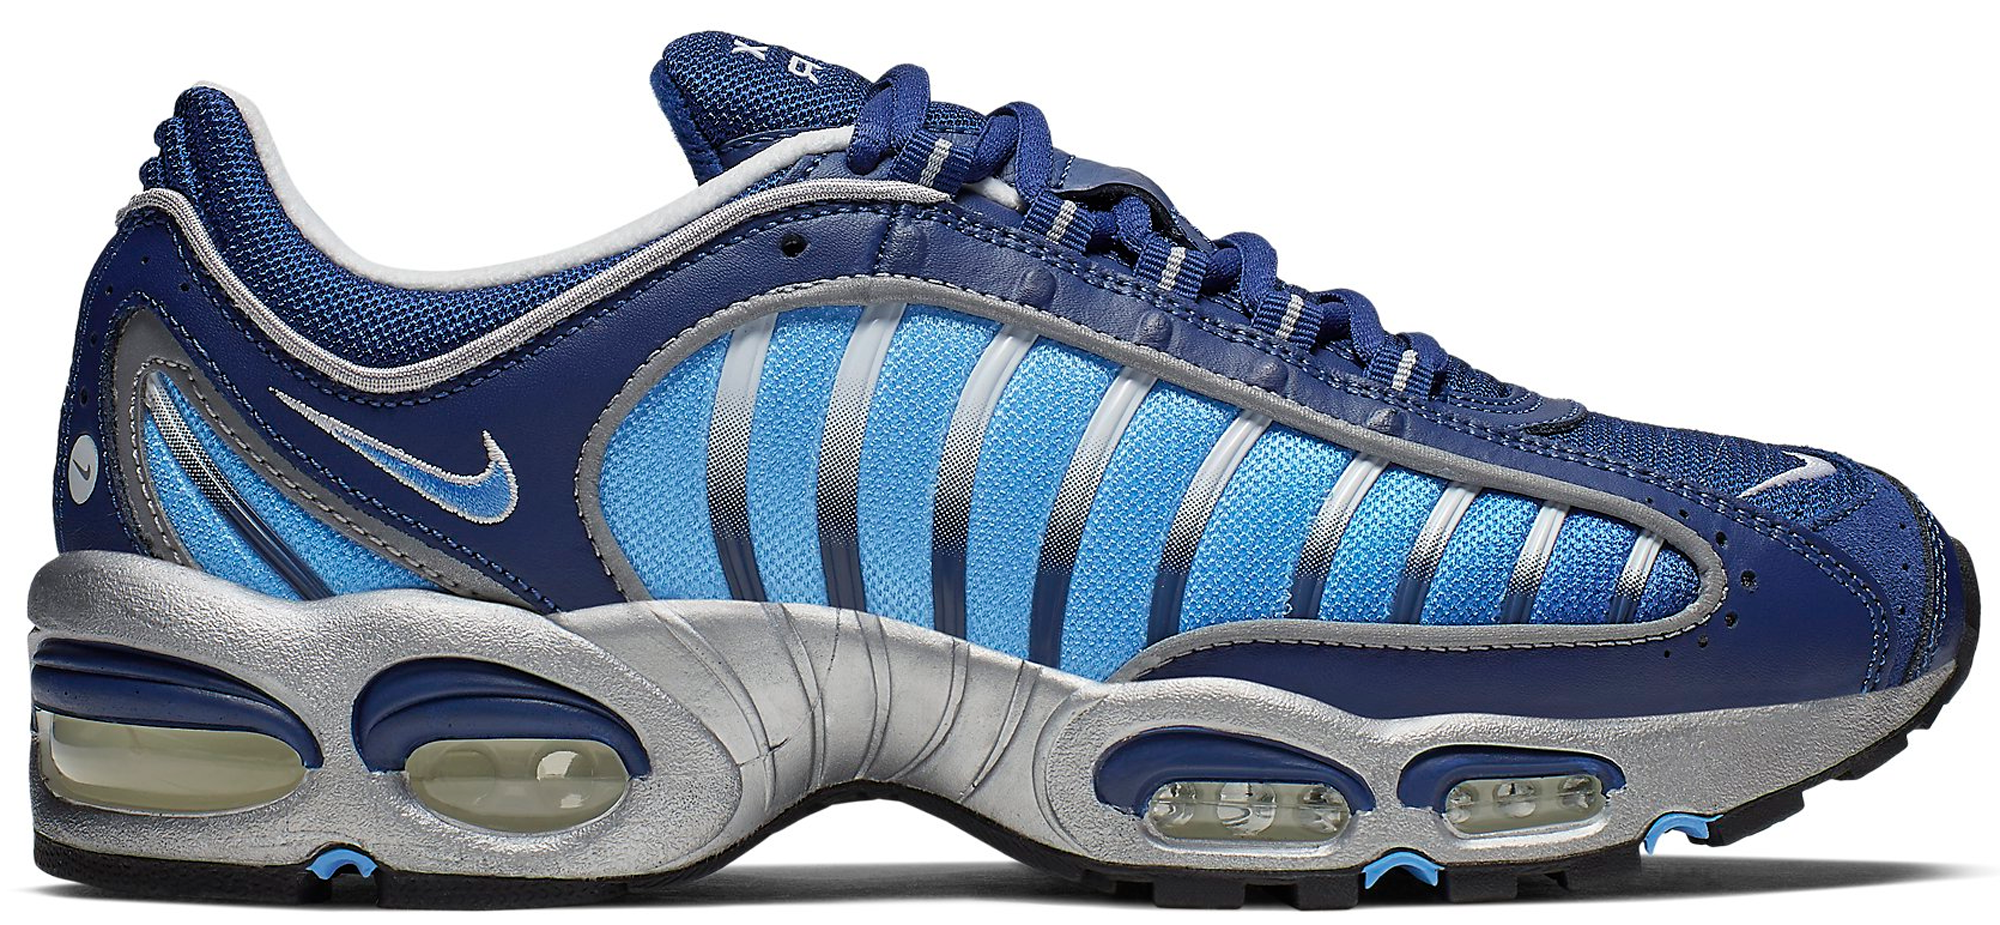 Tailwind height. Nike Air Max Tailwind. Nike Air Tailwind 4. Nike Air Max Tailwind v. Nike Air Max Tailwind 4 Laser Blue.